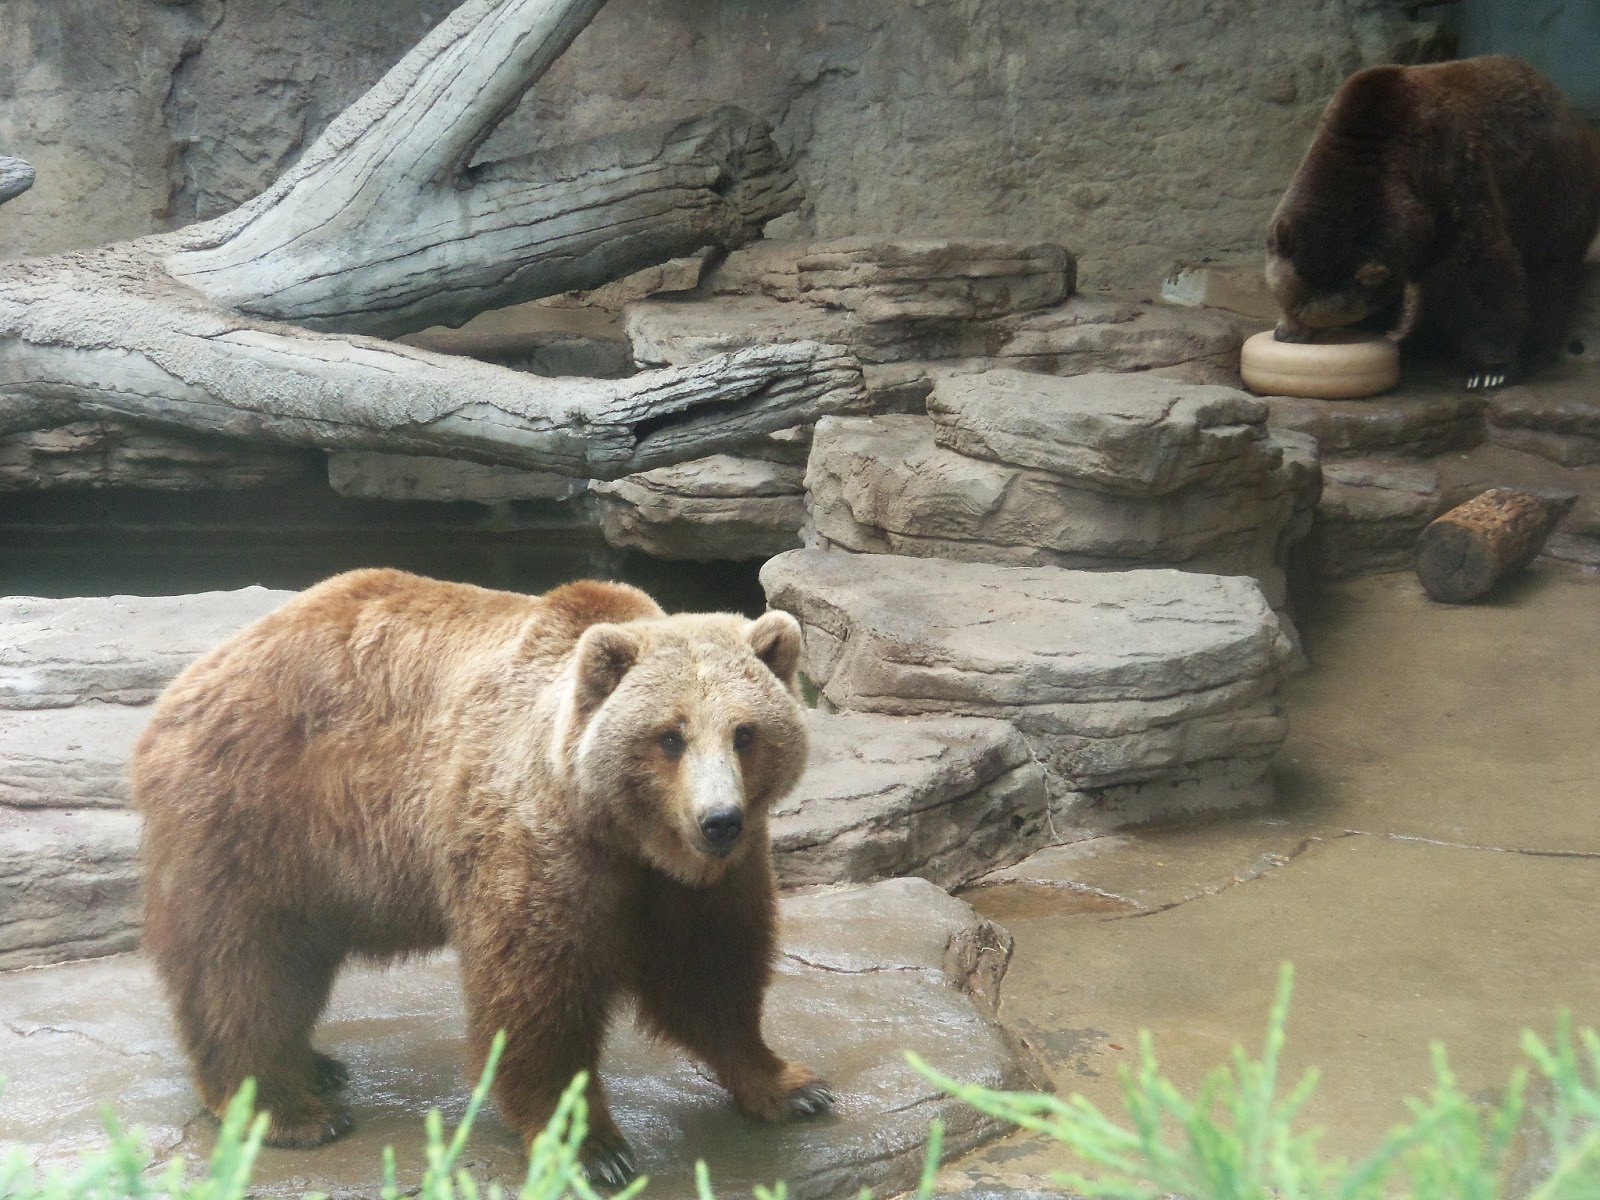 What to do in Denver: The Denver Zoo